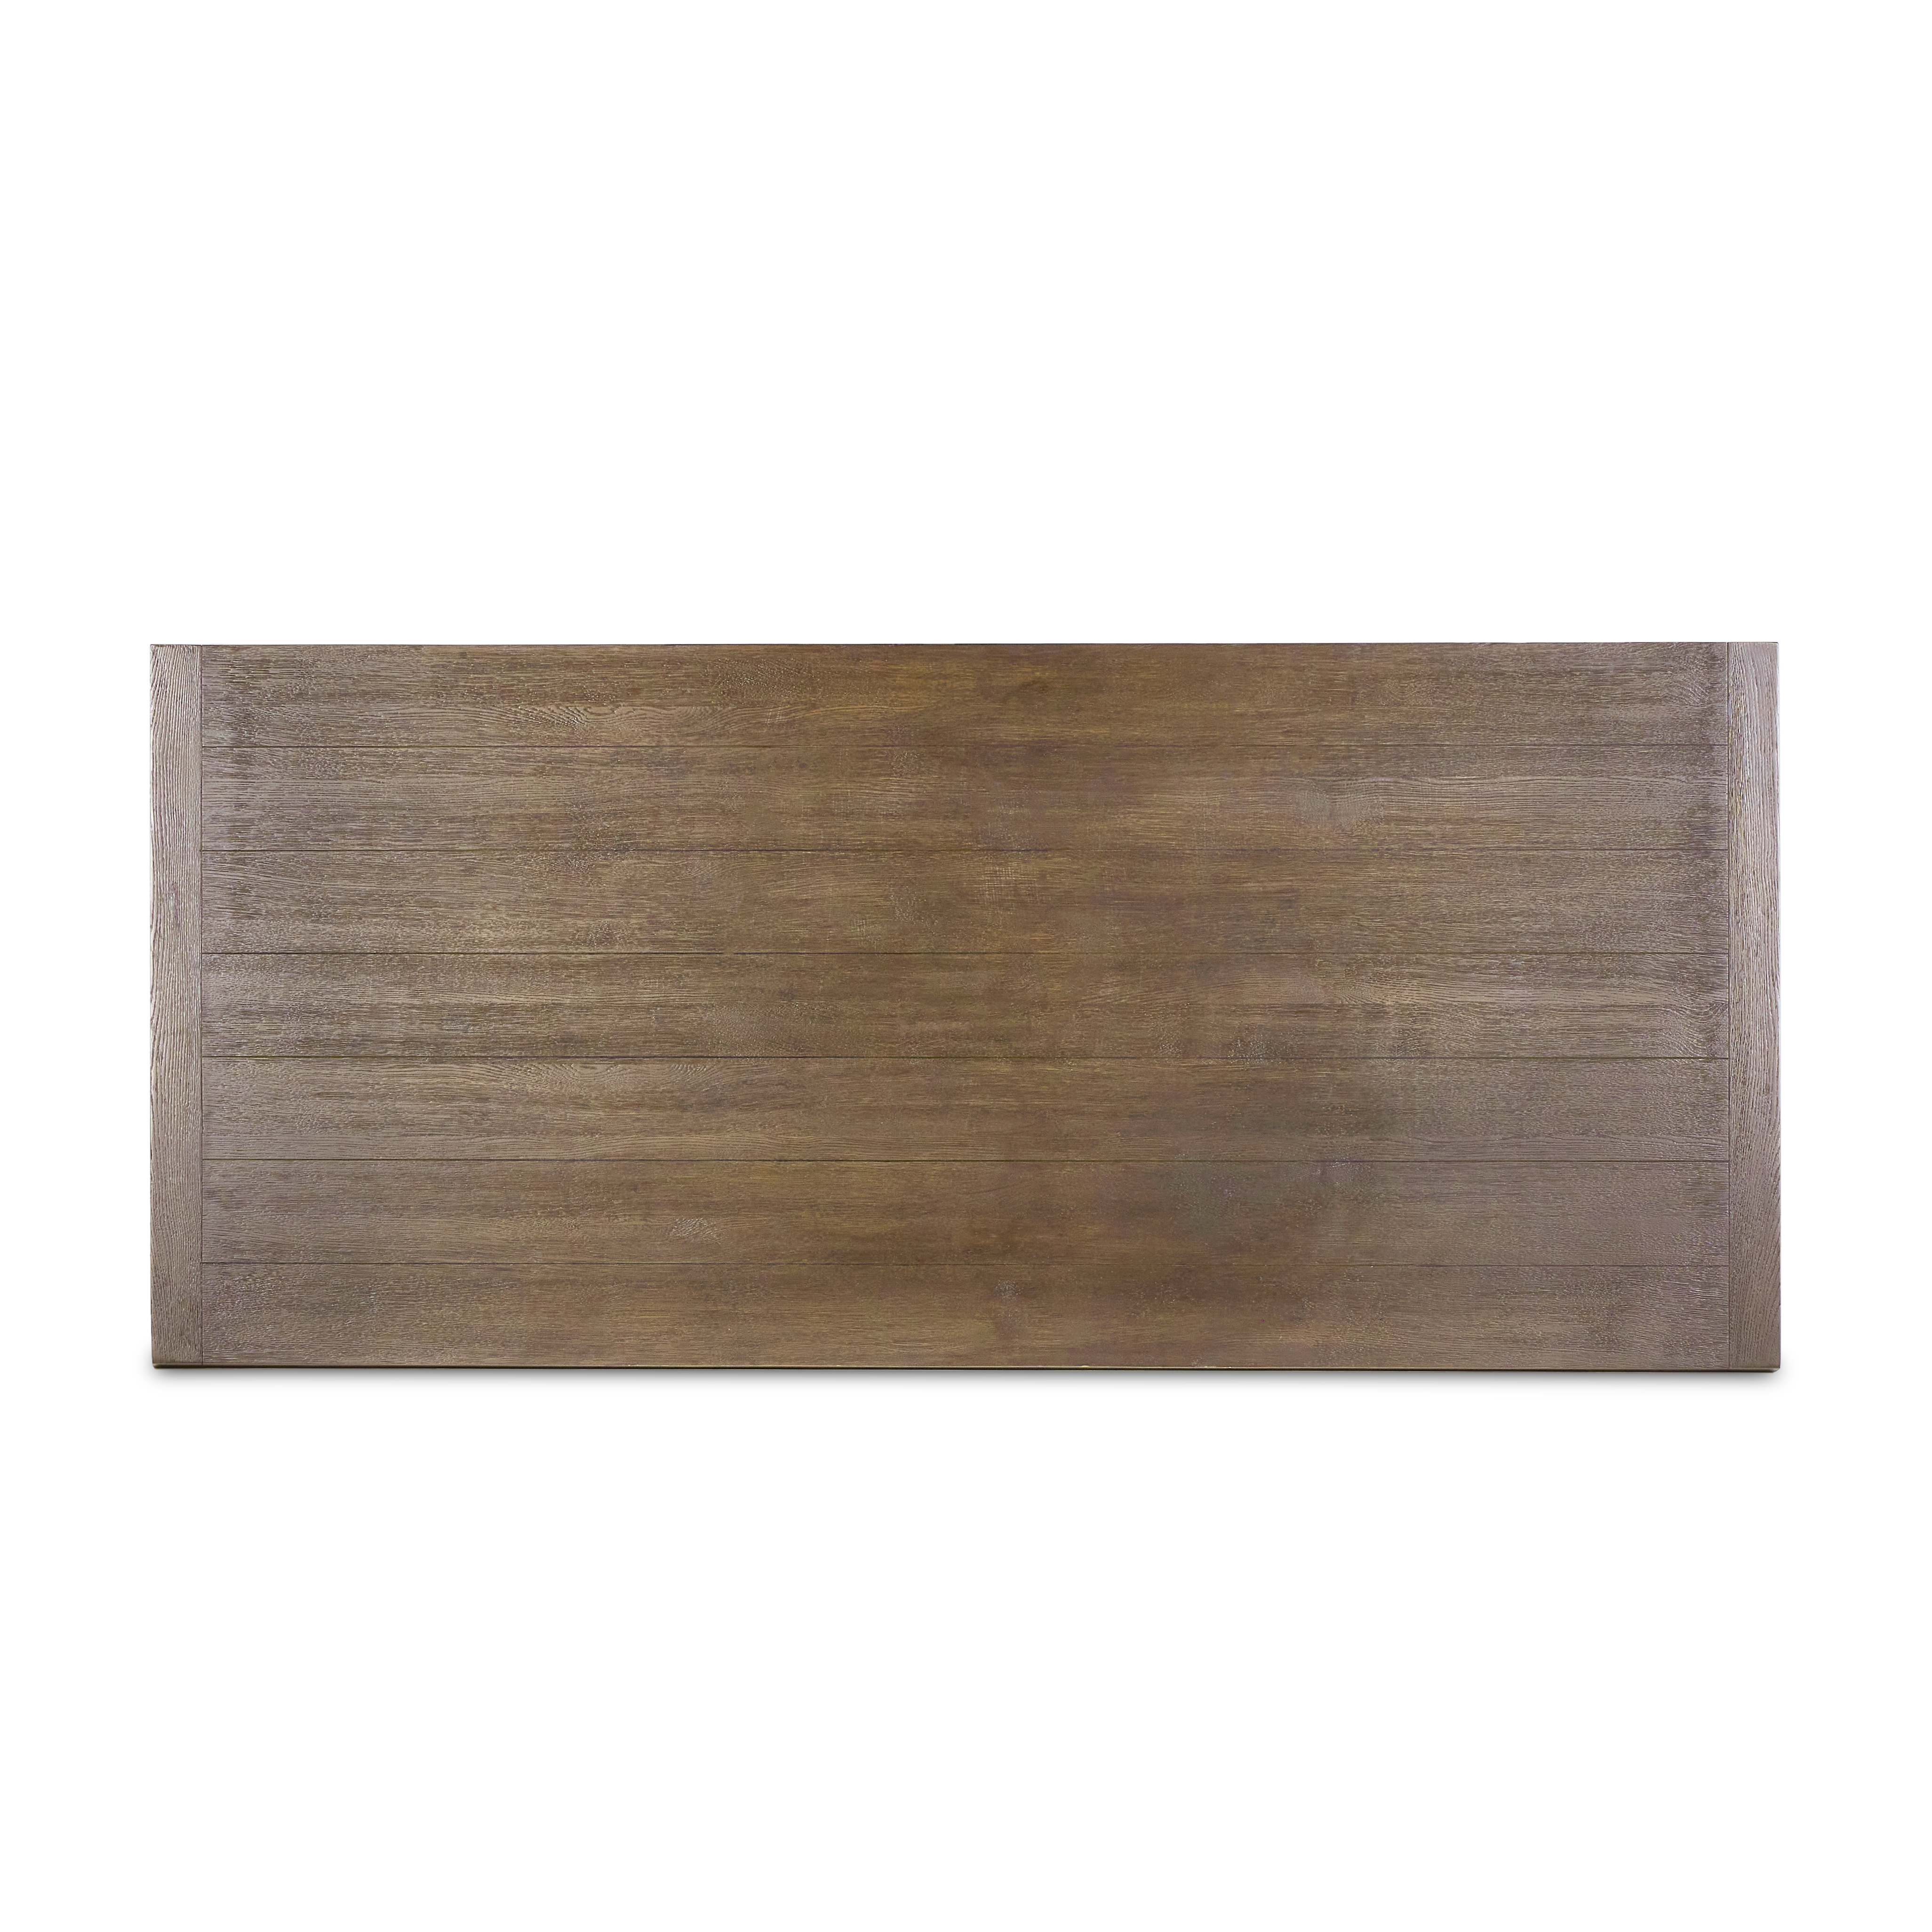 Warby Dining Table 94"-Worn Oak - Image 5